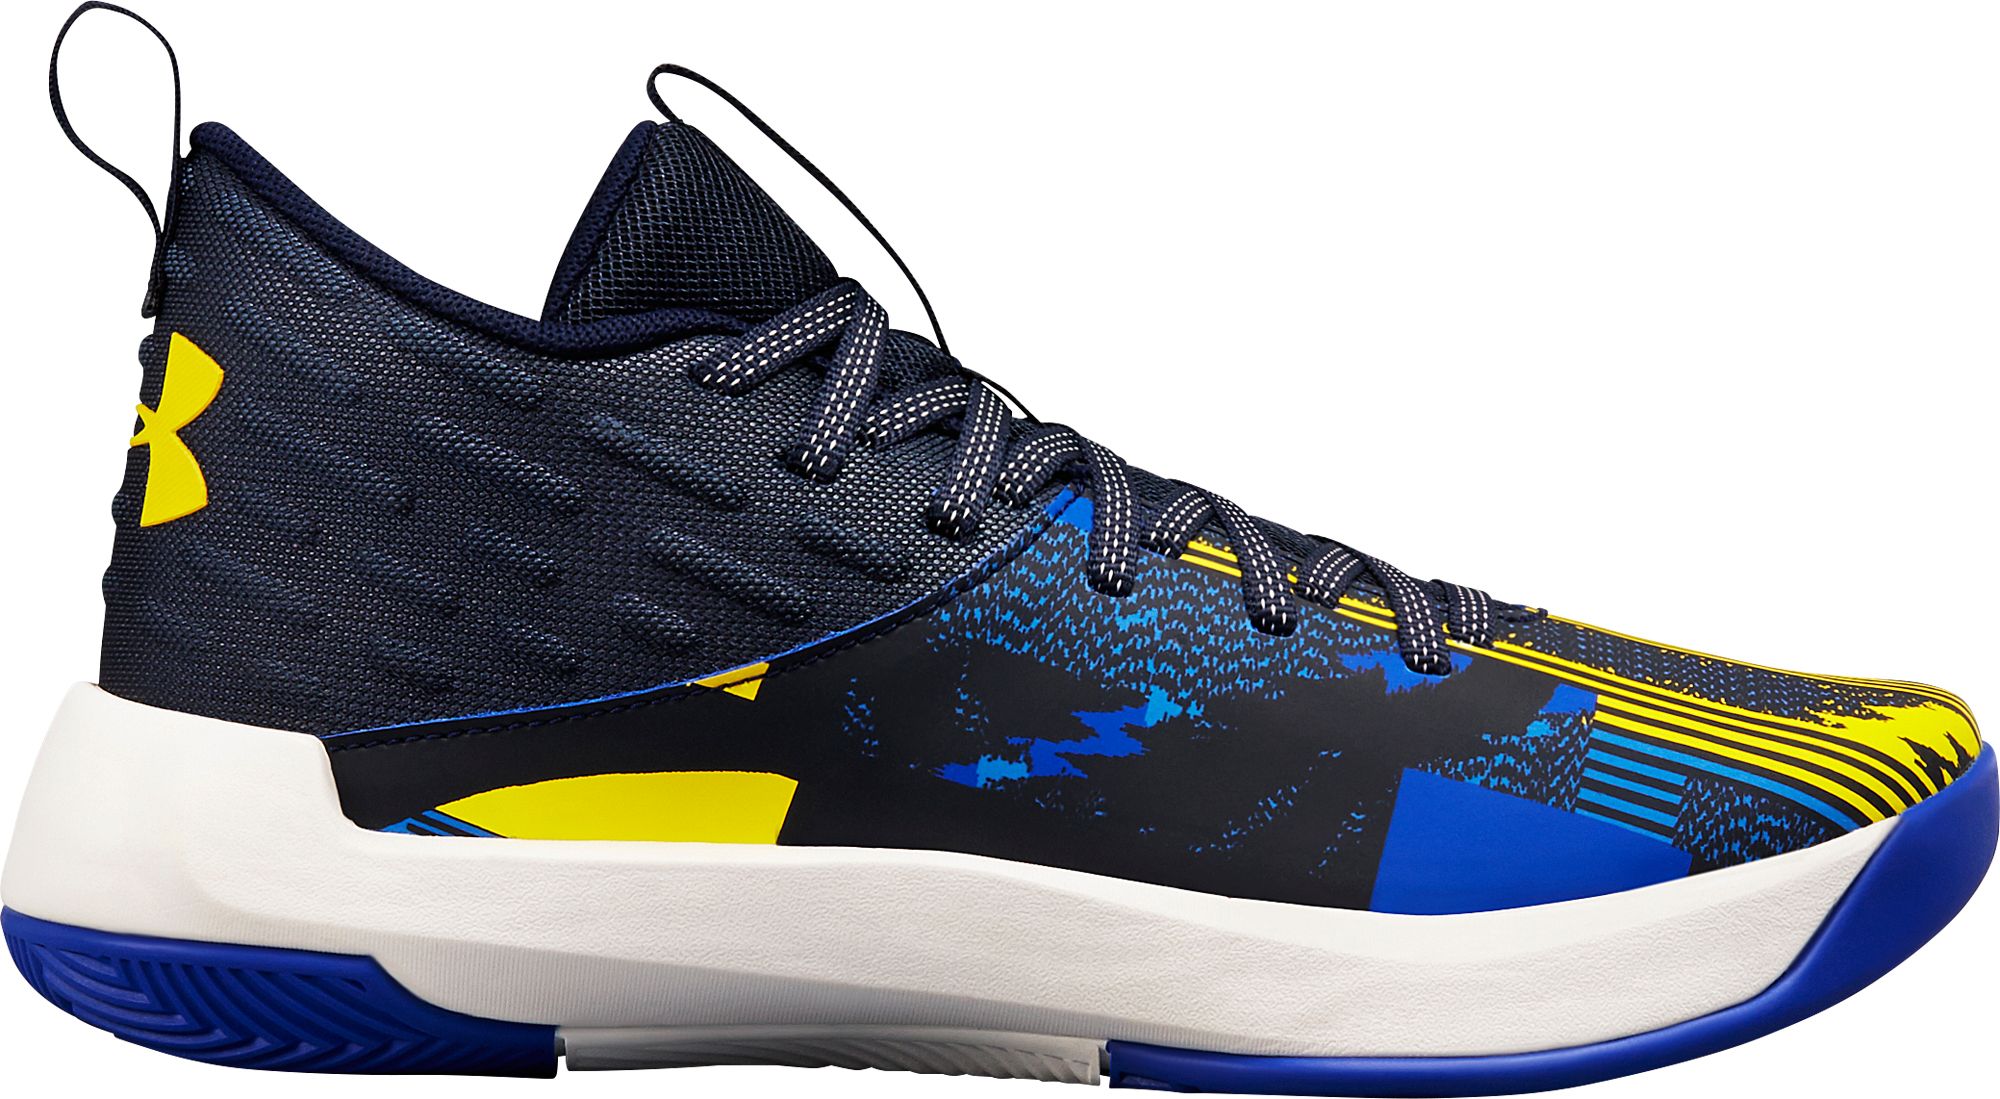 under armour youth lightning 5